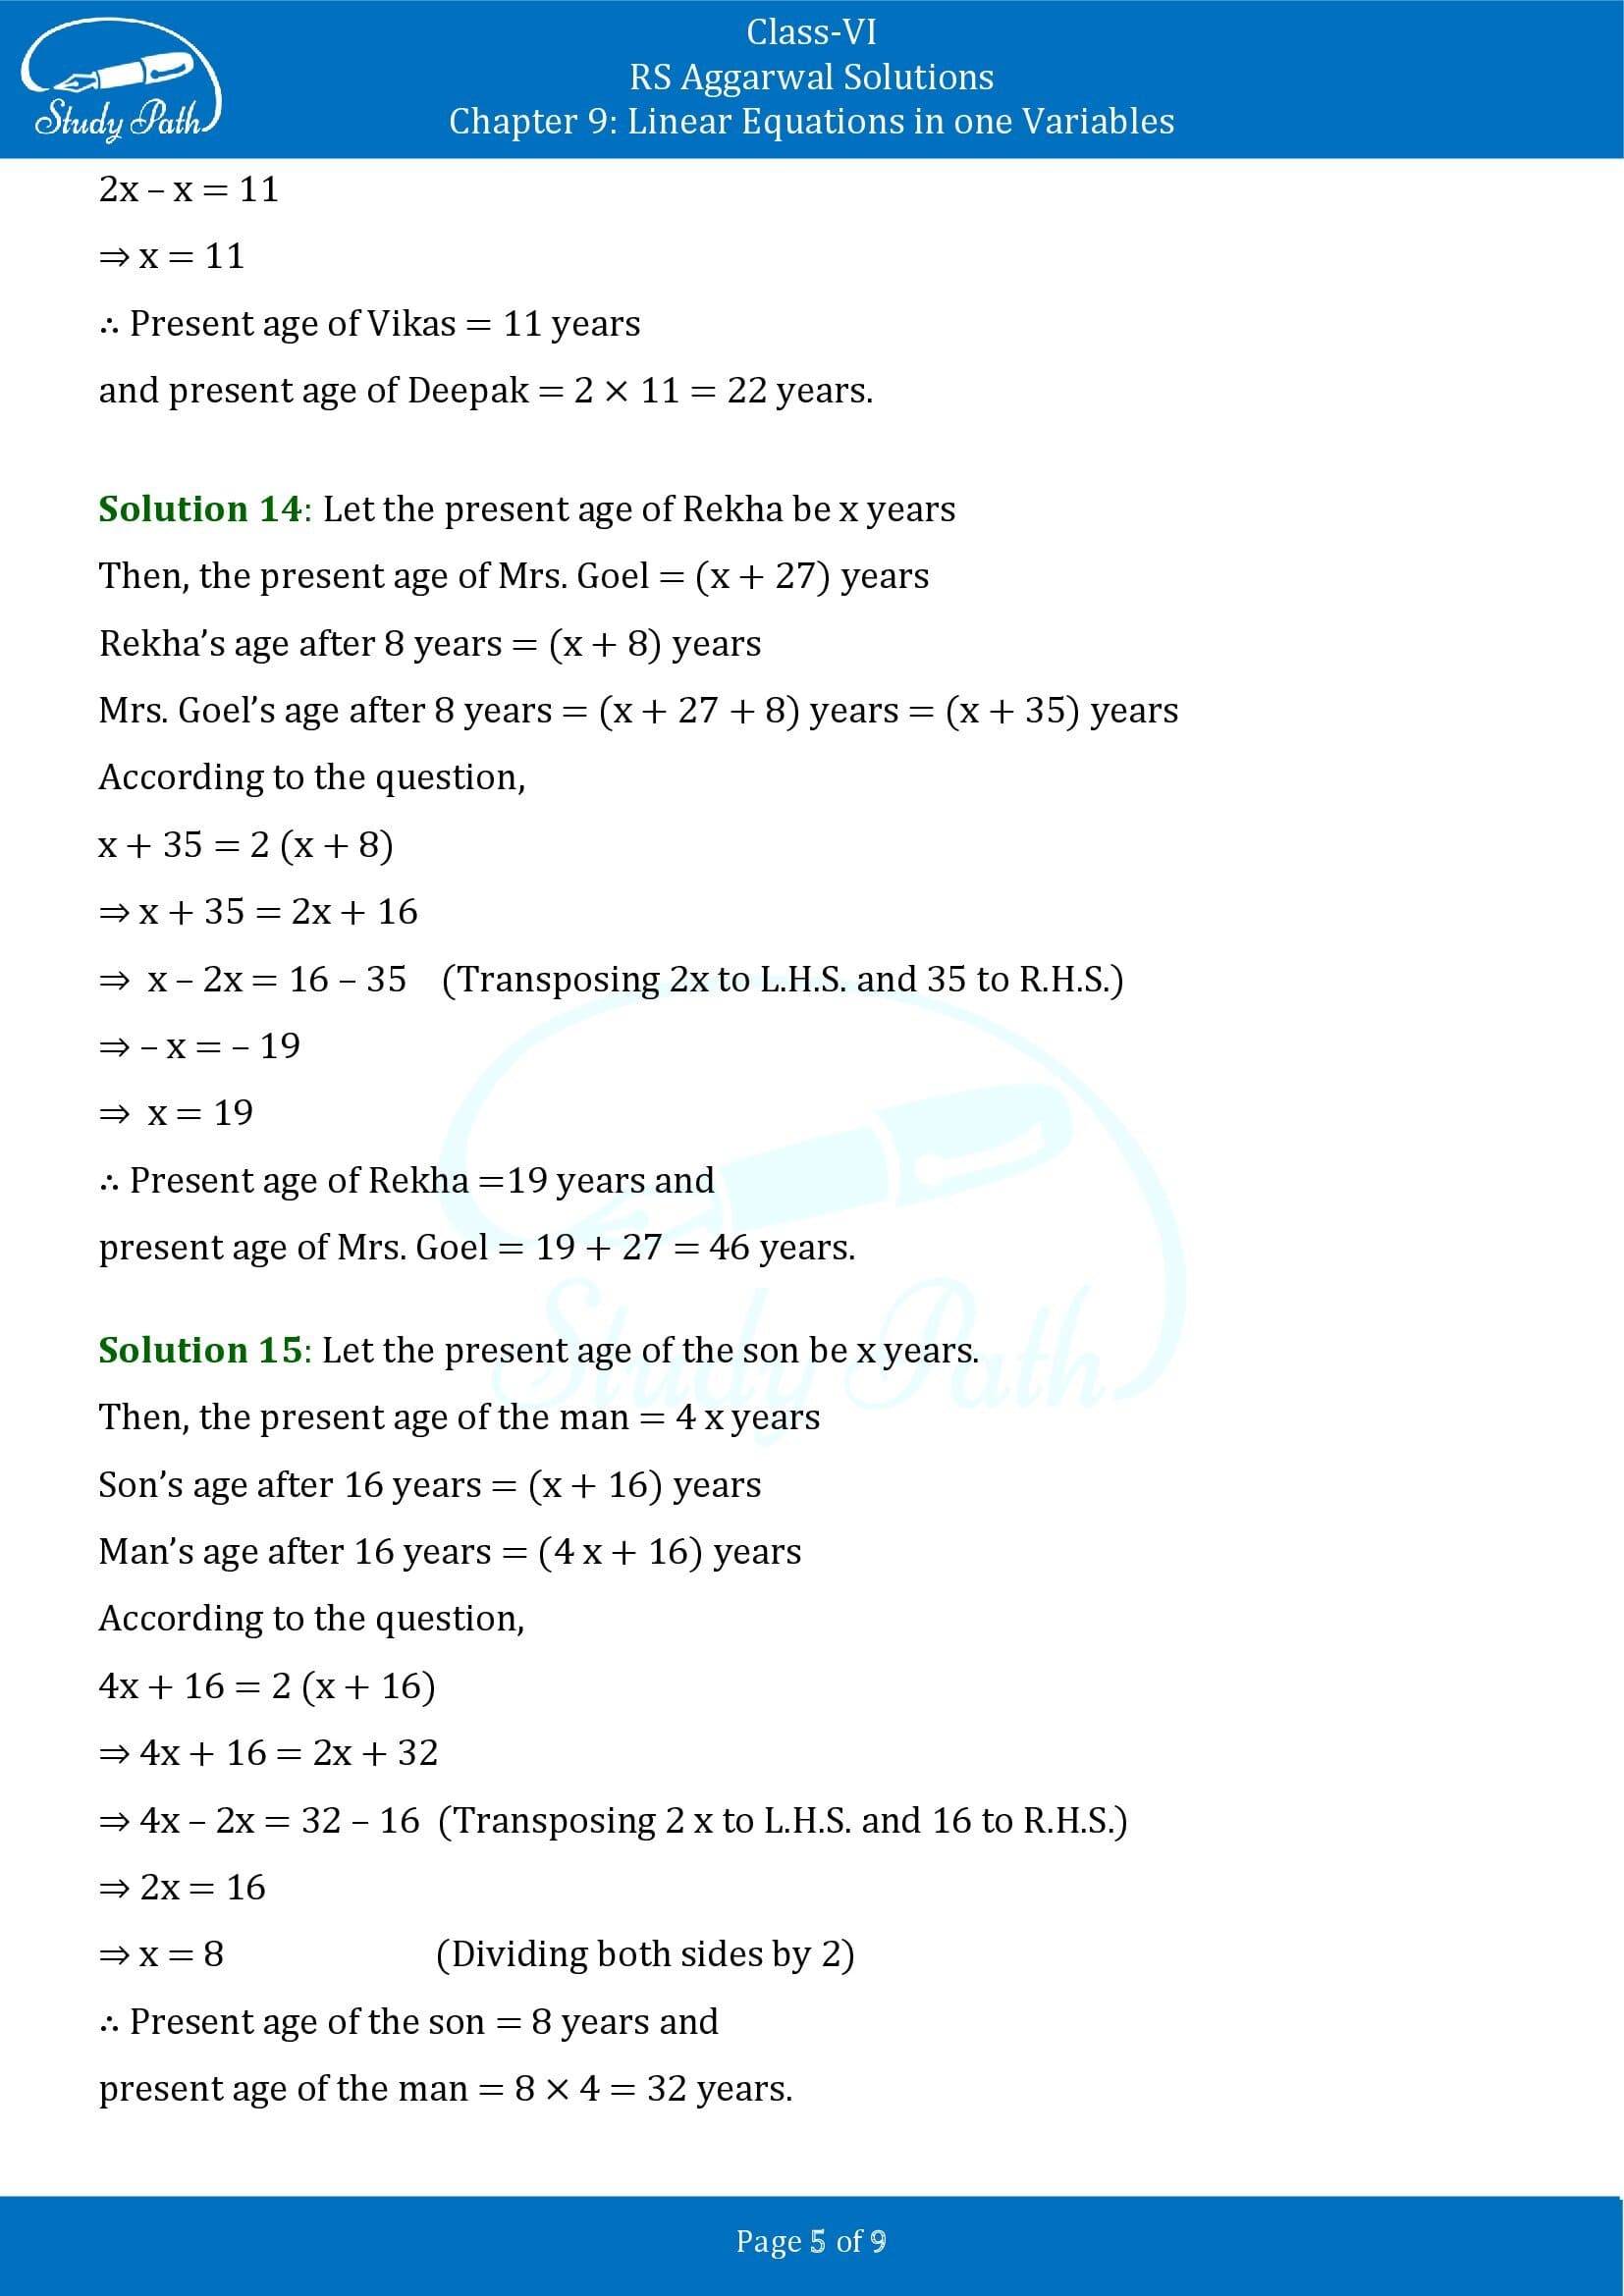 RS Aggarwal Solutions Class 6 Chapter 9 Linear Equations in One Variable Exercise 9C 00005